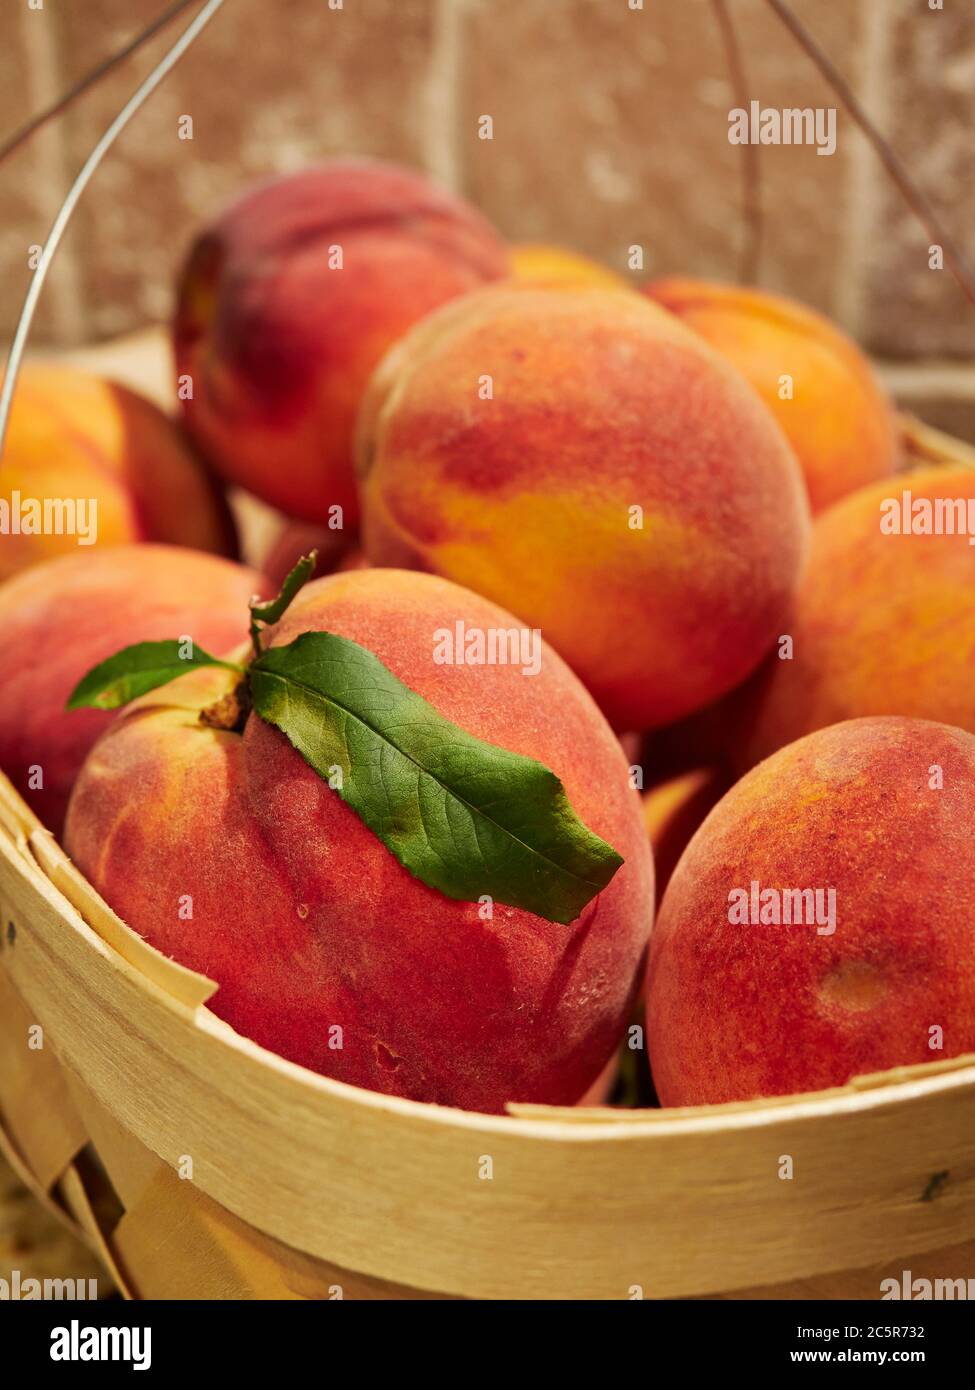 Fresh, ripe cling free peaches a summer fruit in a basket on a kitchen countertop. Stock Photo